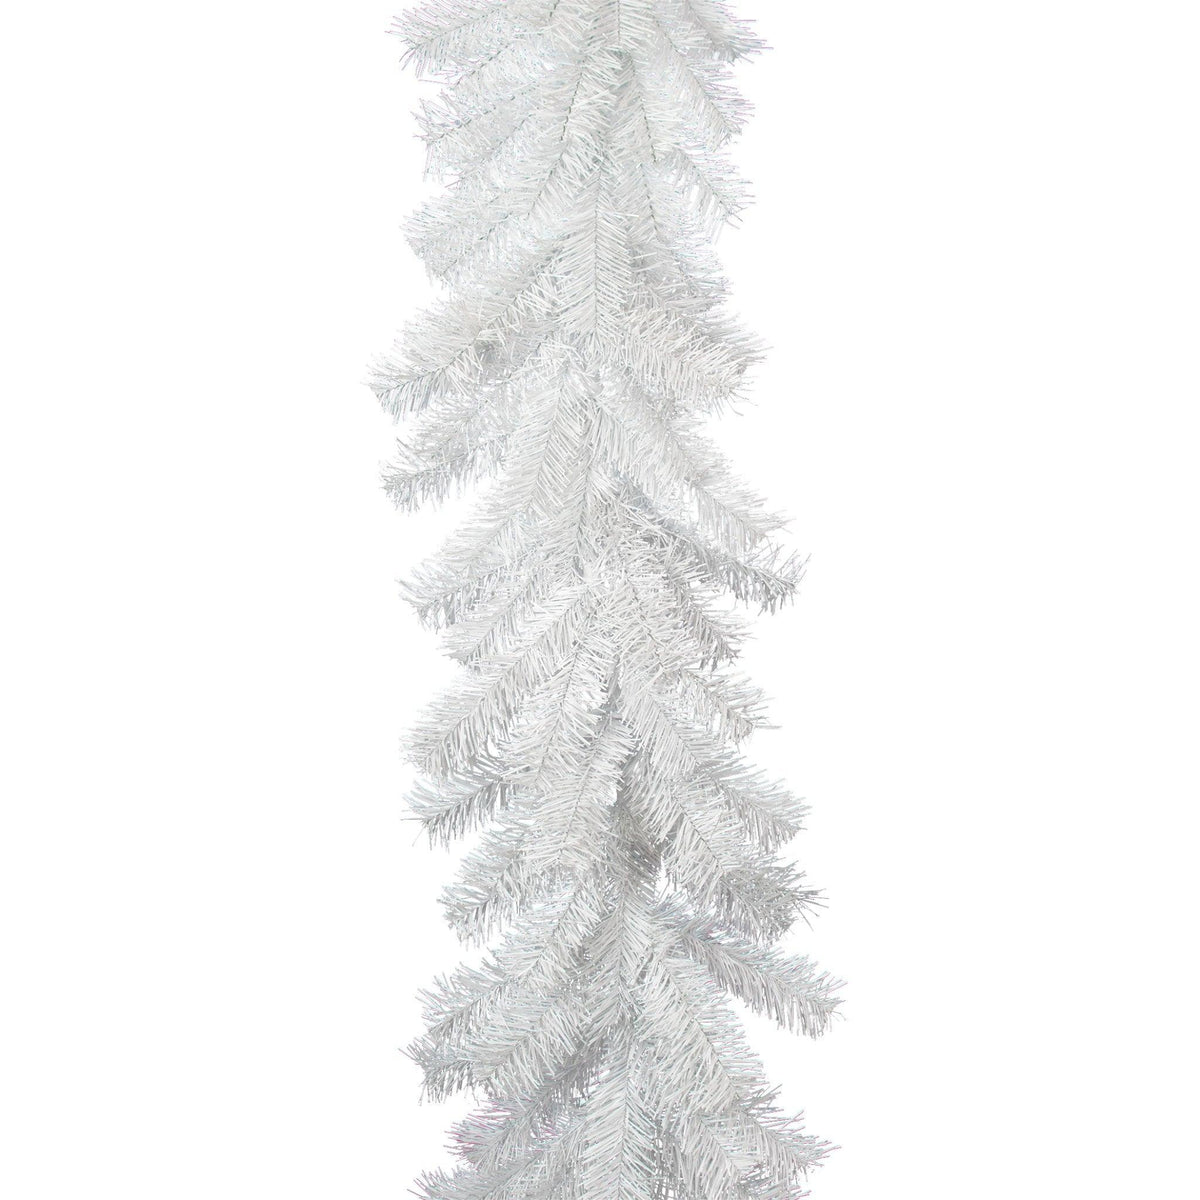 Shop for Lee Display's brand new 6FT Shiny Metallic White Tinsel Brush Garlands on sale now at leedisplay.com.  6FT Long